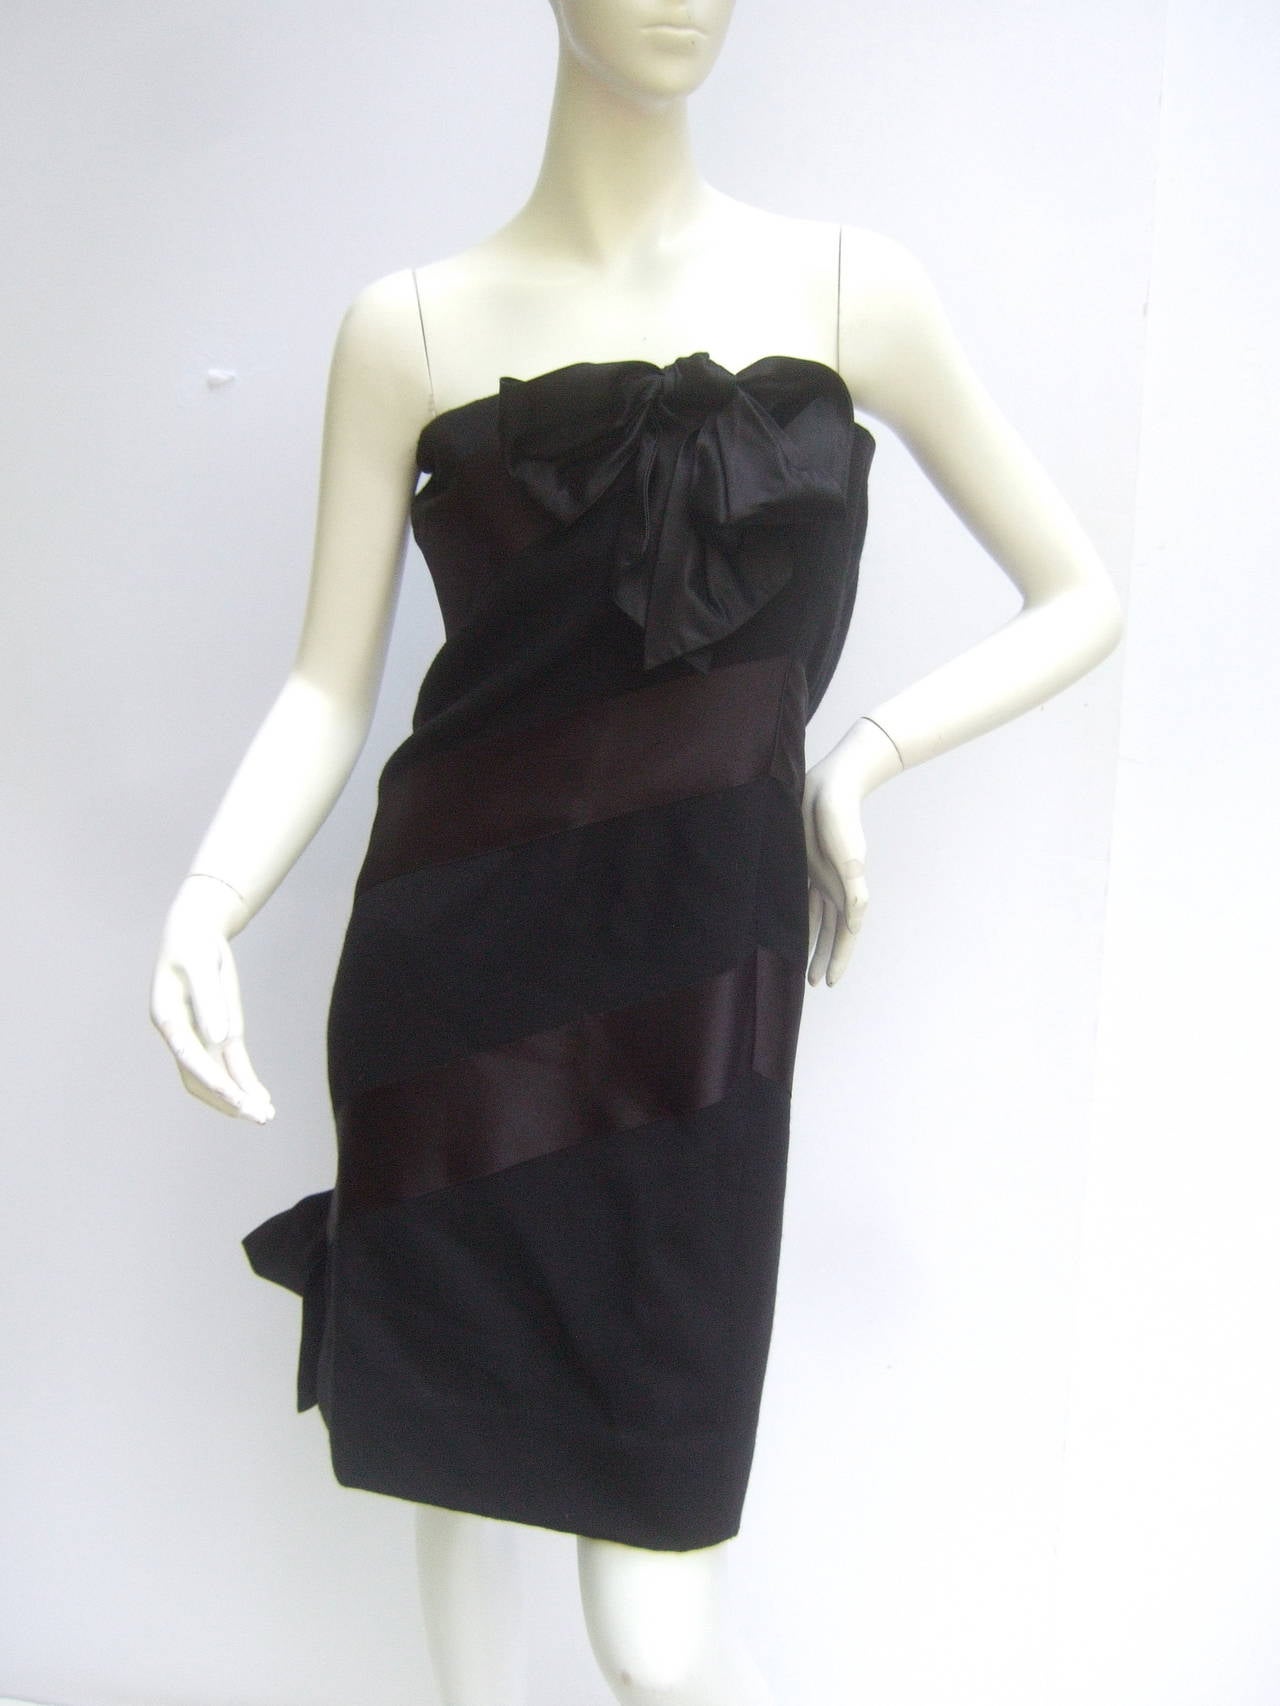 Bill Black Chic black wool & satin strapless cocktail dress
The classic evening dress is designed with wool & satin
stripes. The wide satin stripe panels are on a diagonal slant

The bodice is accented with a billowy black satin bow
The bow